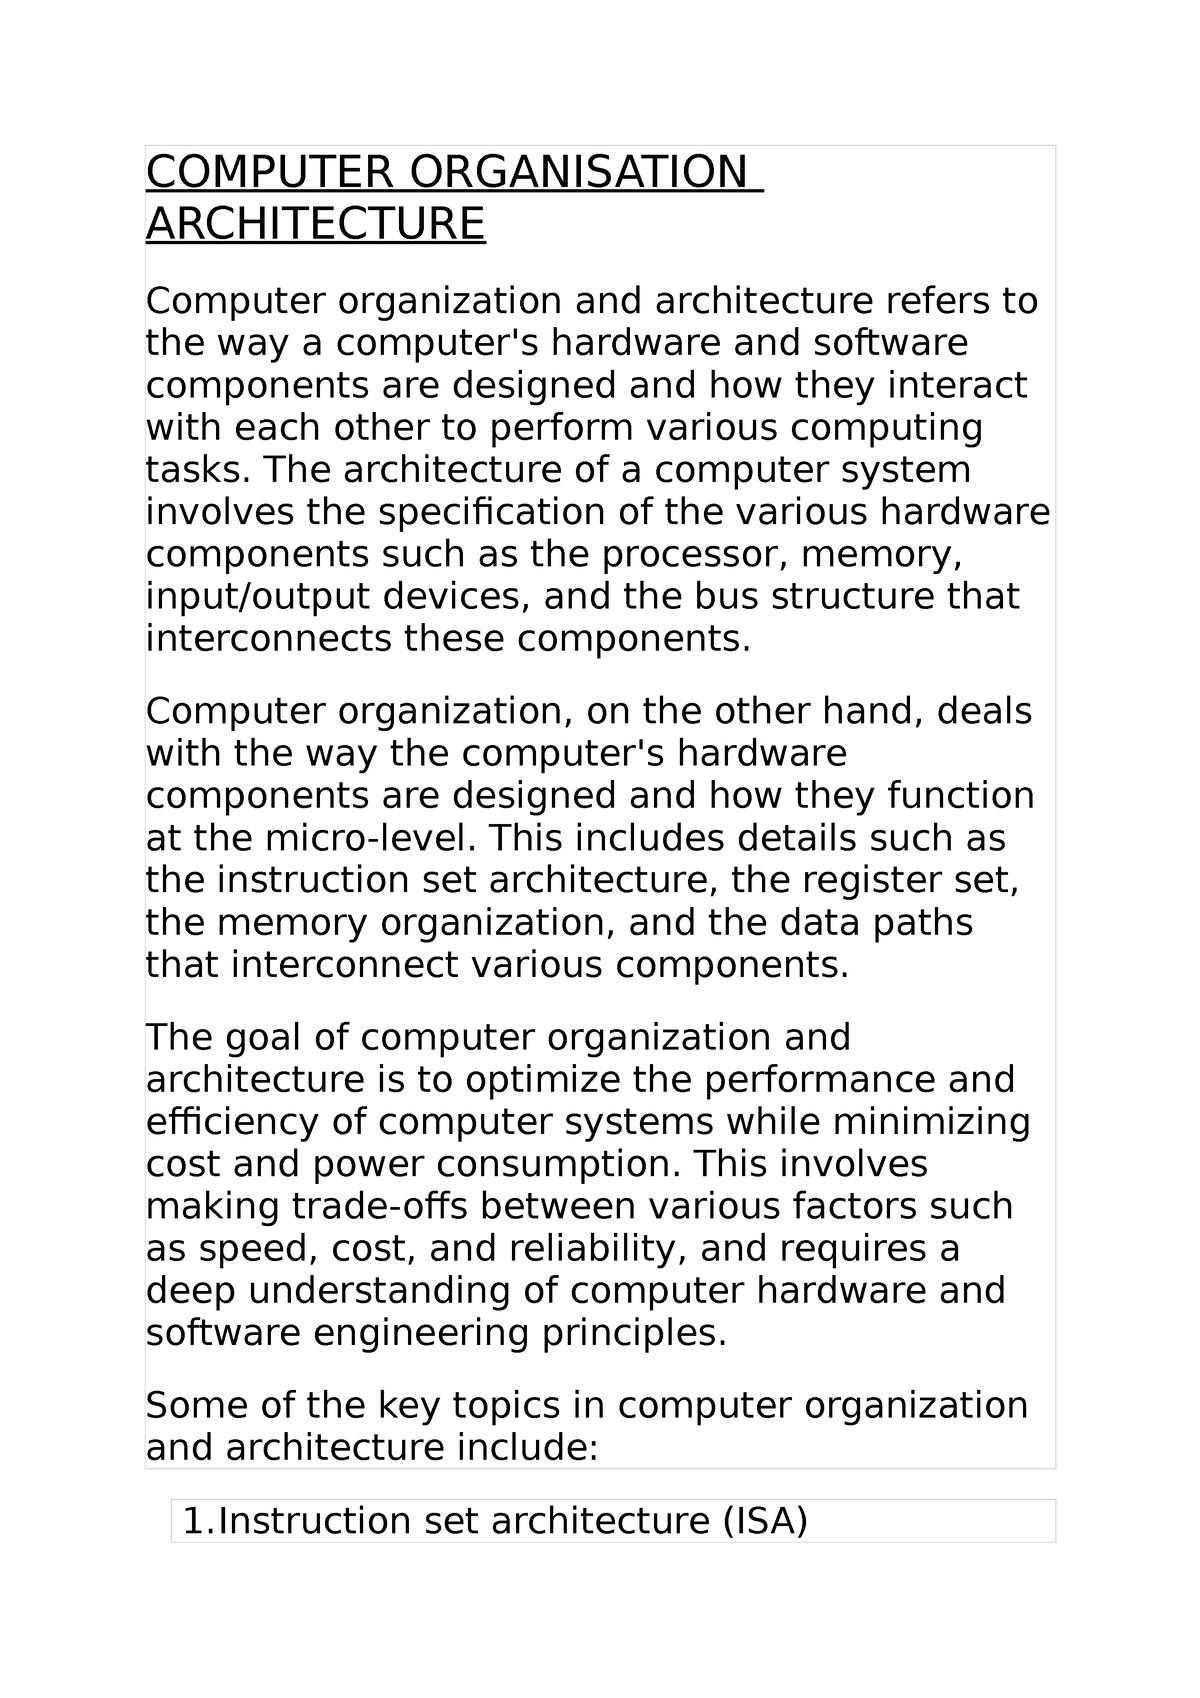 research paper topics for computer architecture